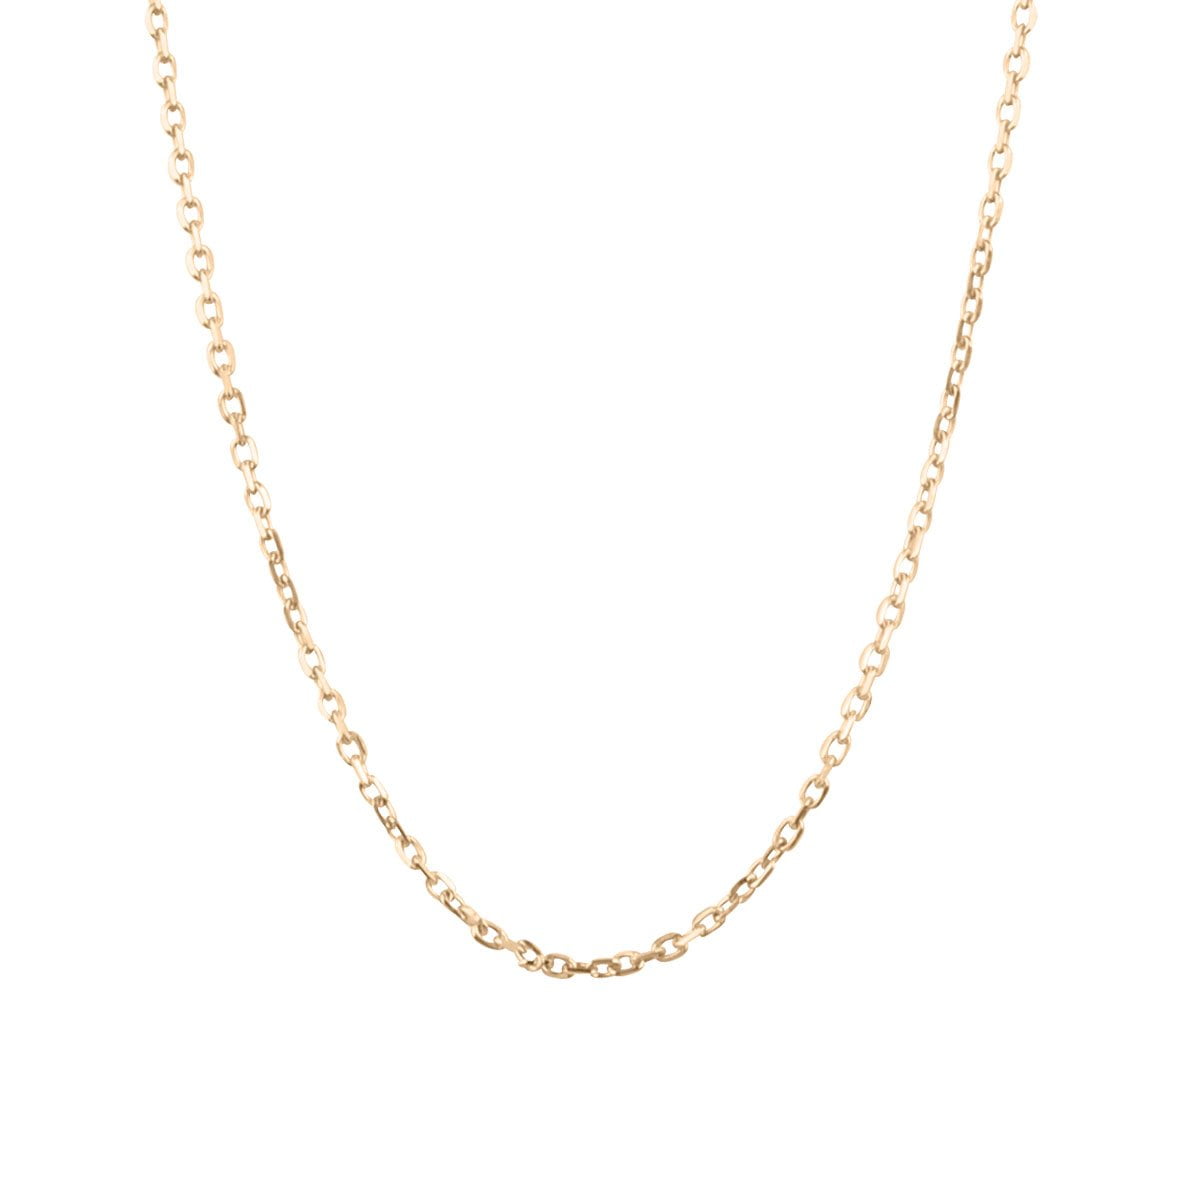 18ct Rose Gold Close 17inch Blecher Necklace Chain